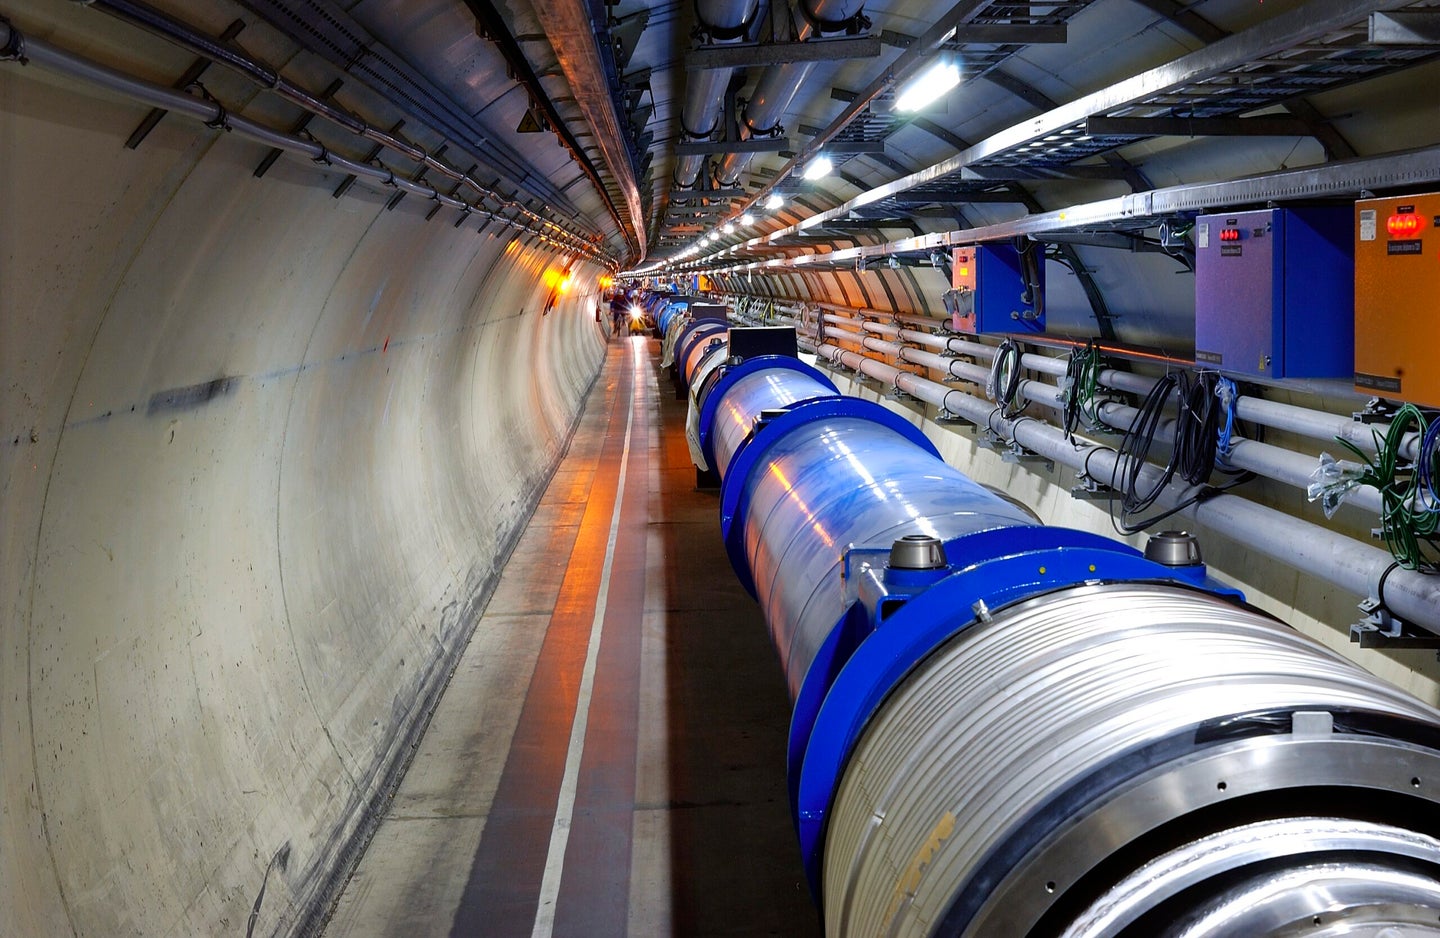 The X particle was detected at CERN's underground LHC facility.